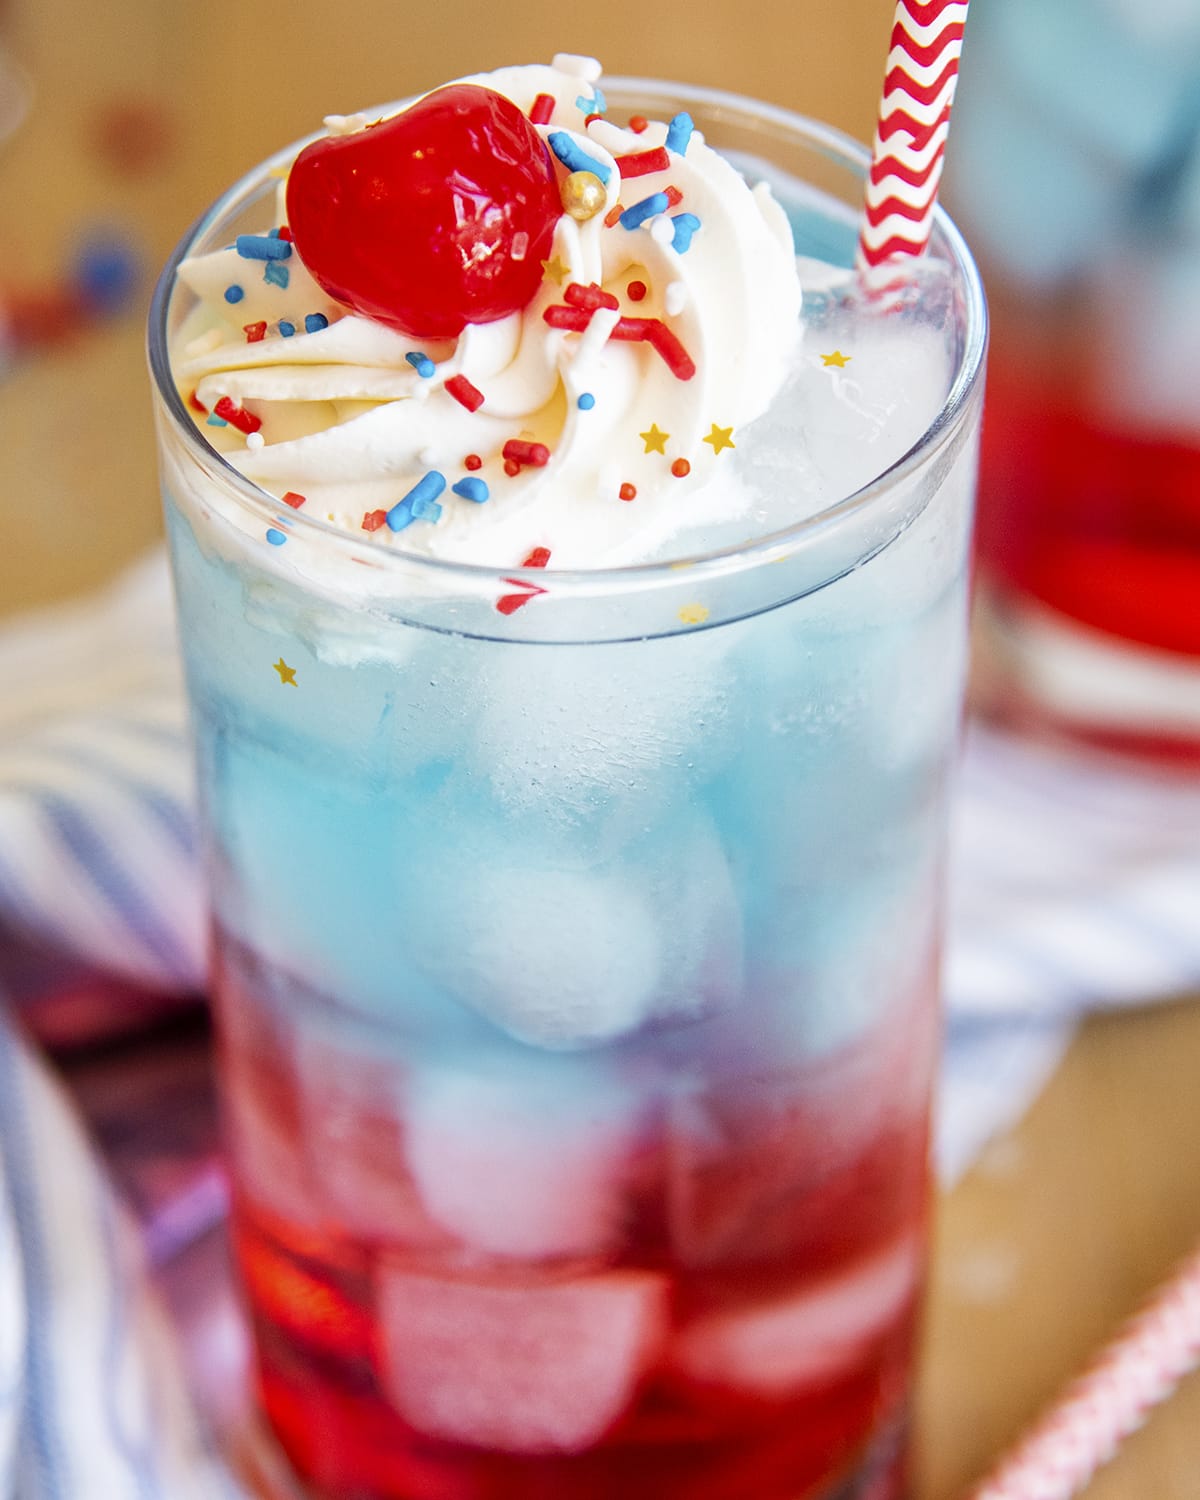 A close up of a glass full of a red and blue drink topped with whipped cream and a cherry.